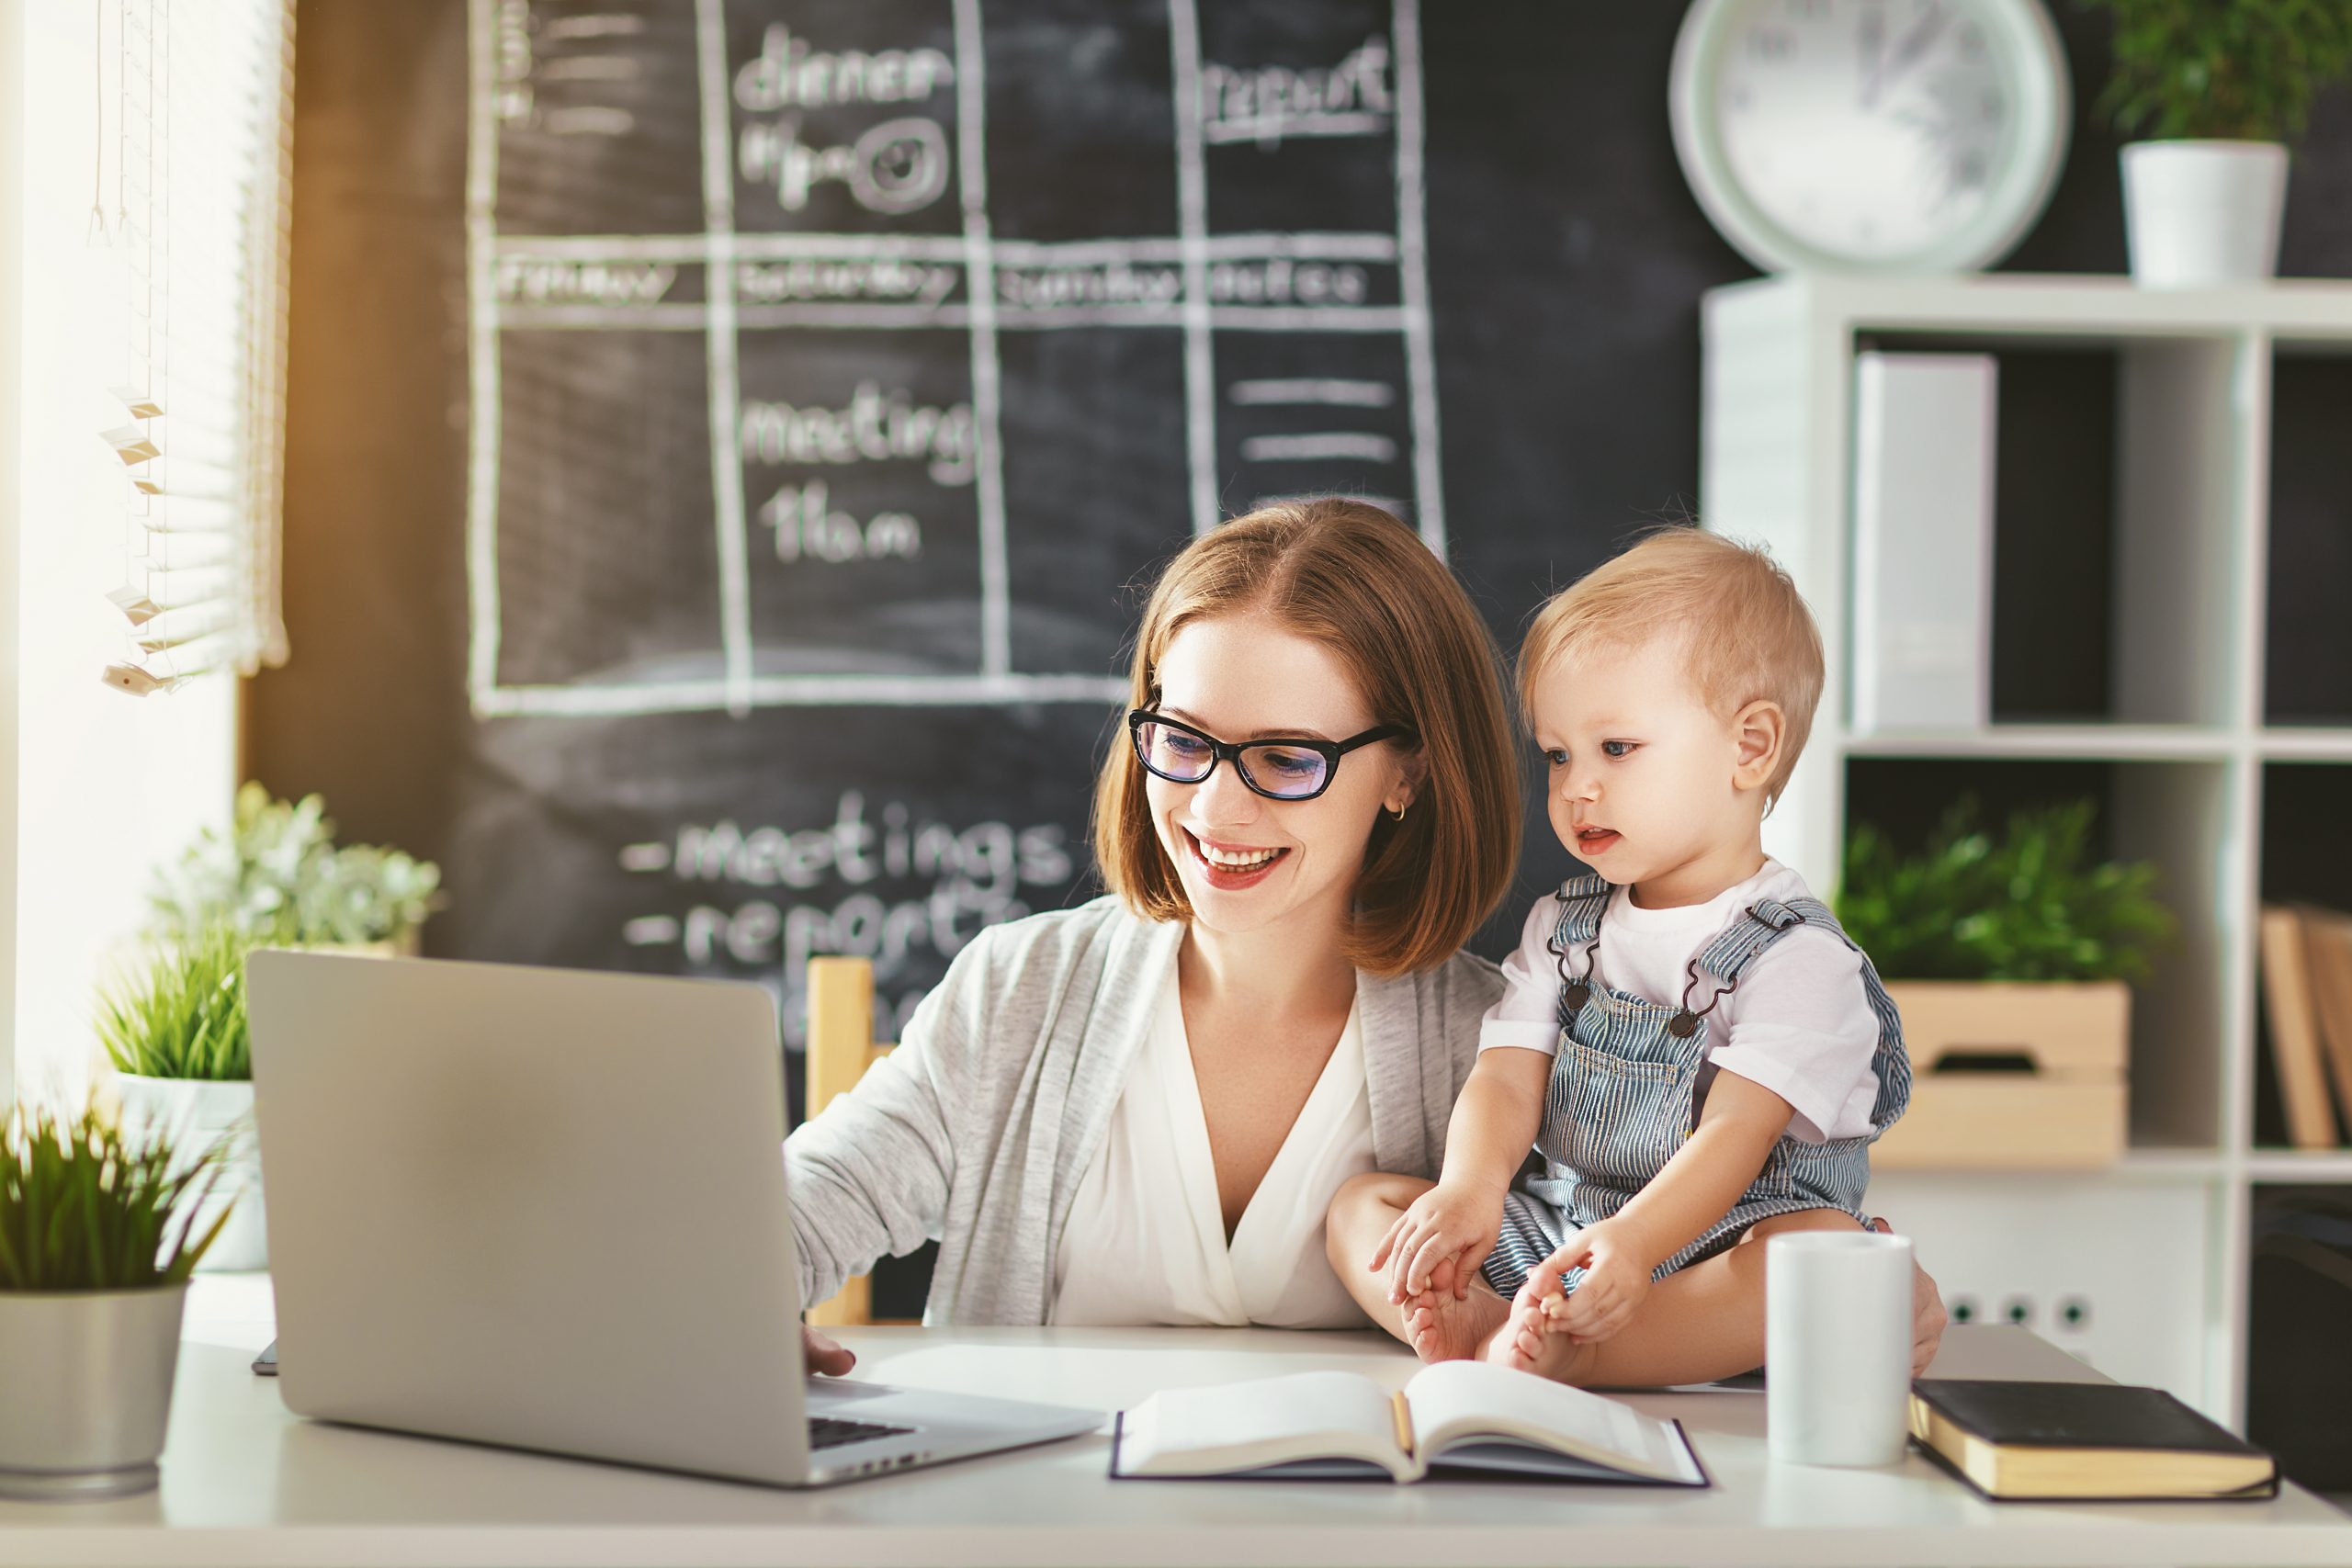 Businesswoman,Mother,Woman,With,A,Toddler,Working,At,The,Computer